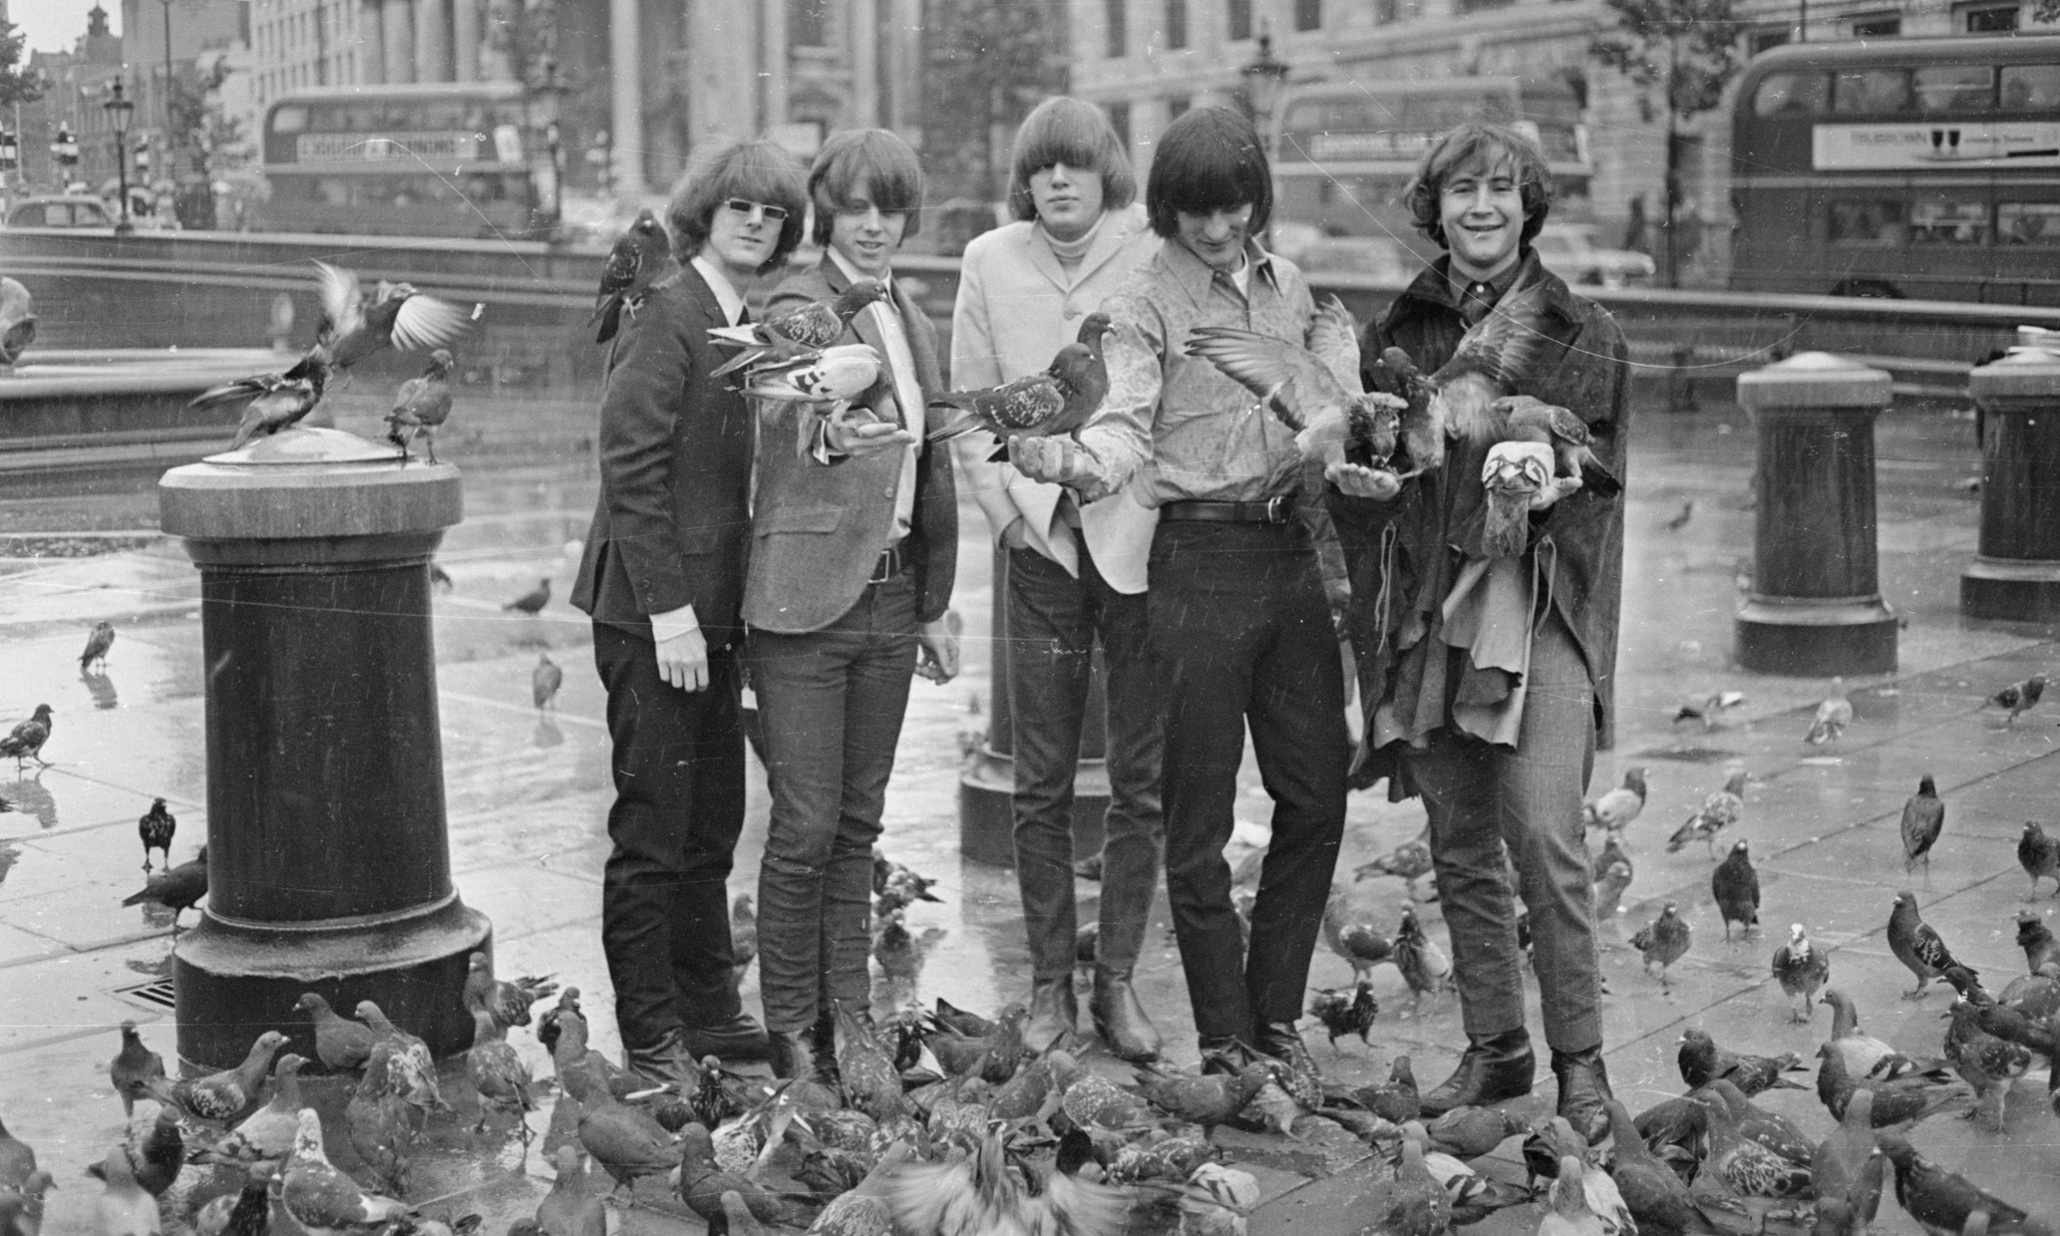 the byrds live with eight miles high